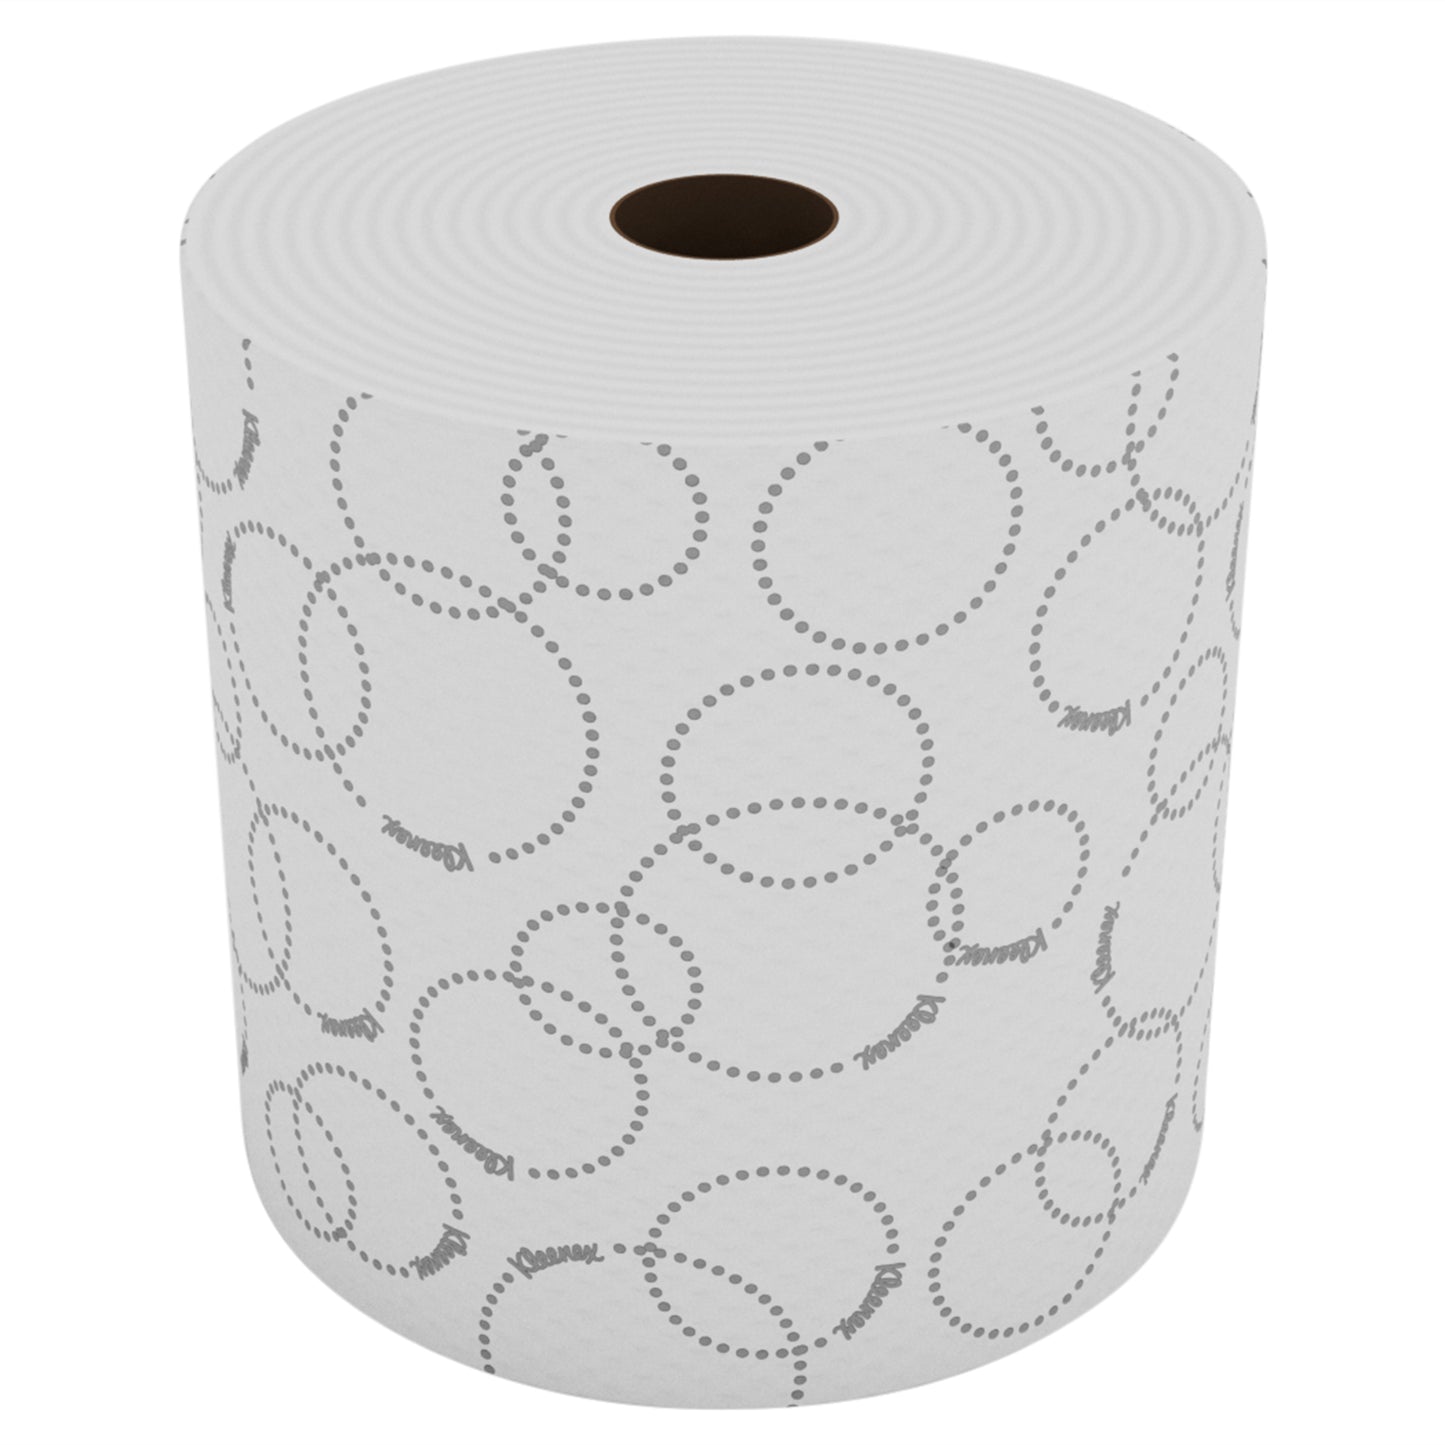 KIMBERLY-CLARK KLEENEX Rolled Hand Towel - 2 Ply (Pack of 3 Rolls) (Code 6562)